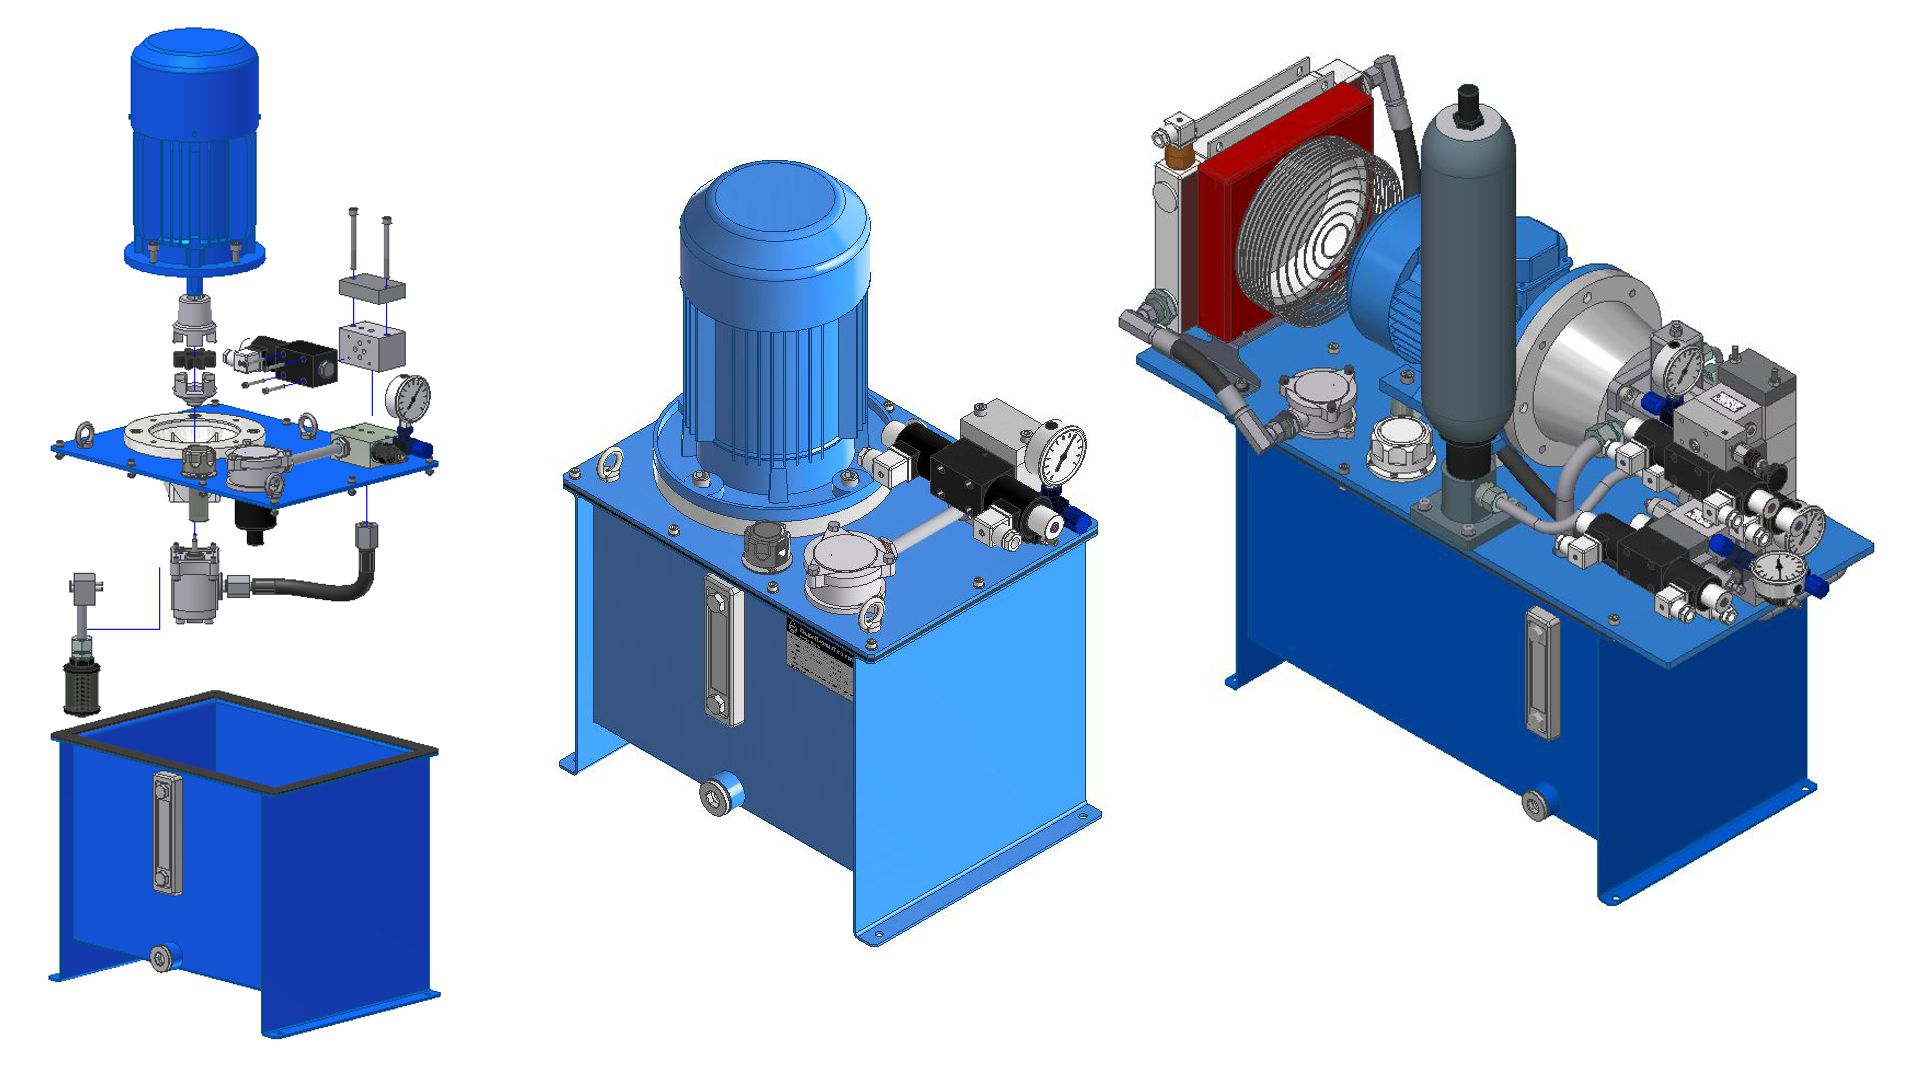 What are the Components of Hydraulic Power Pack?